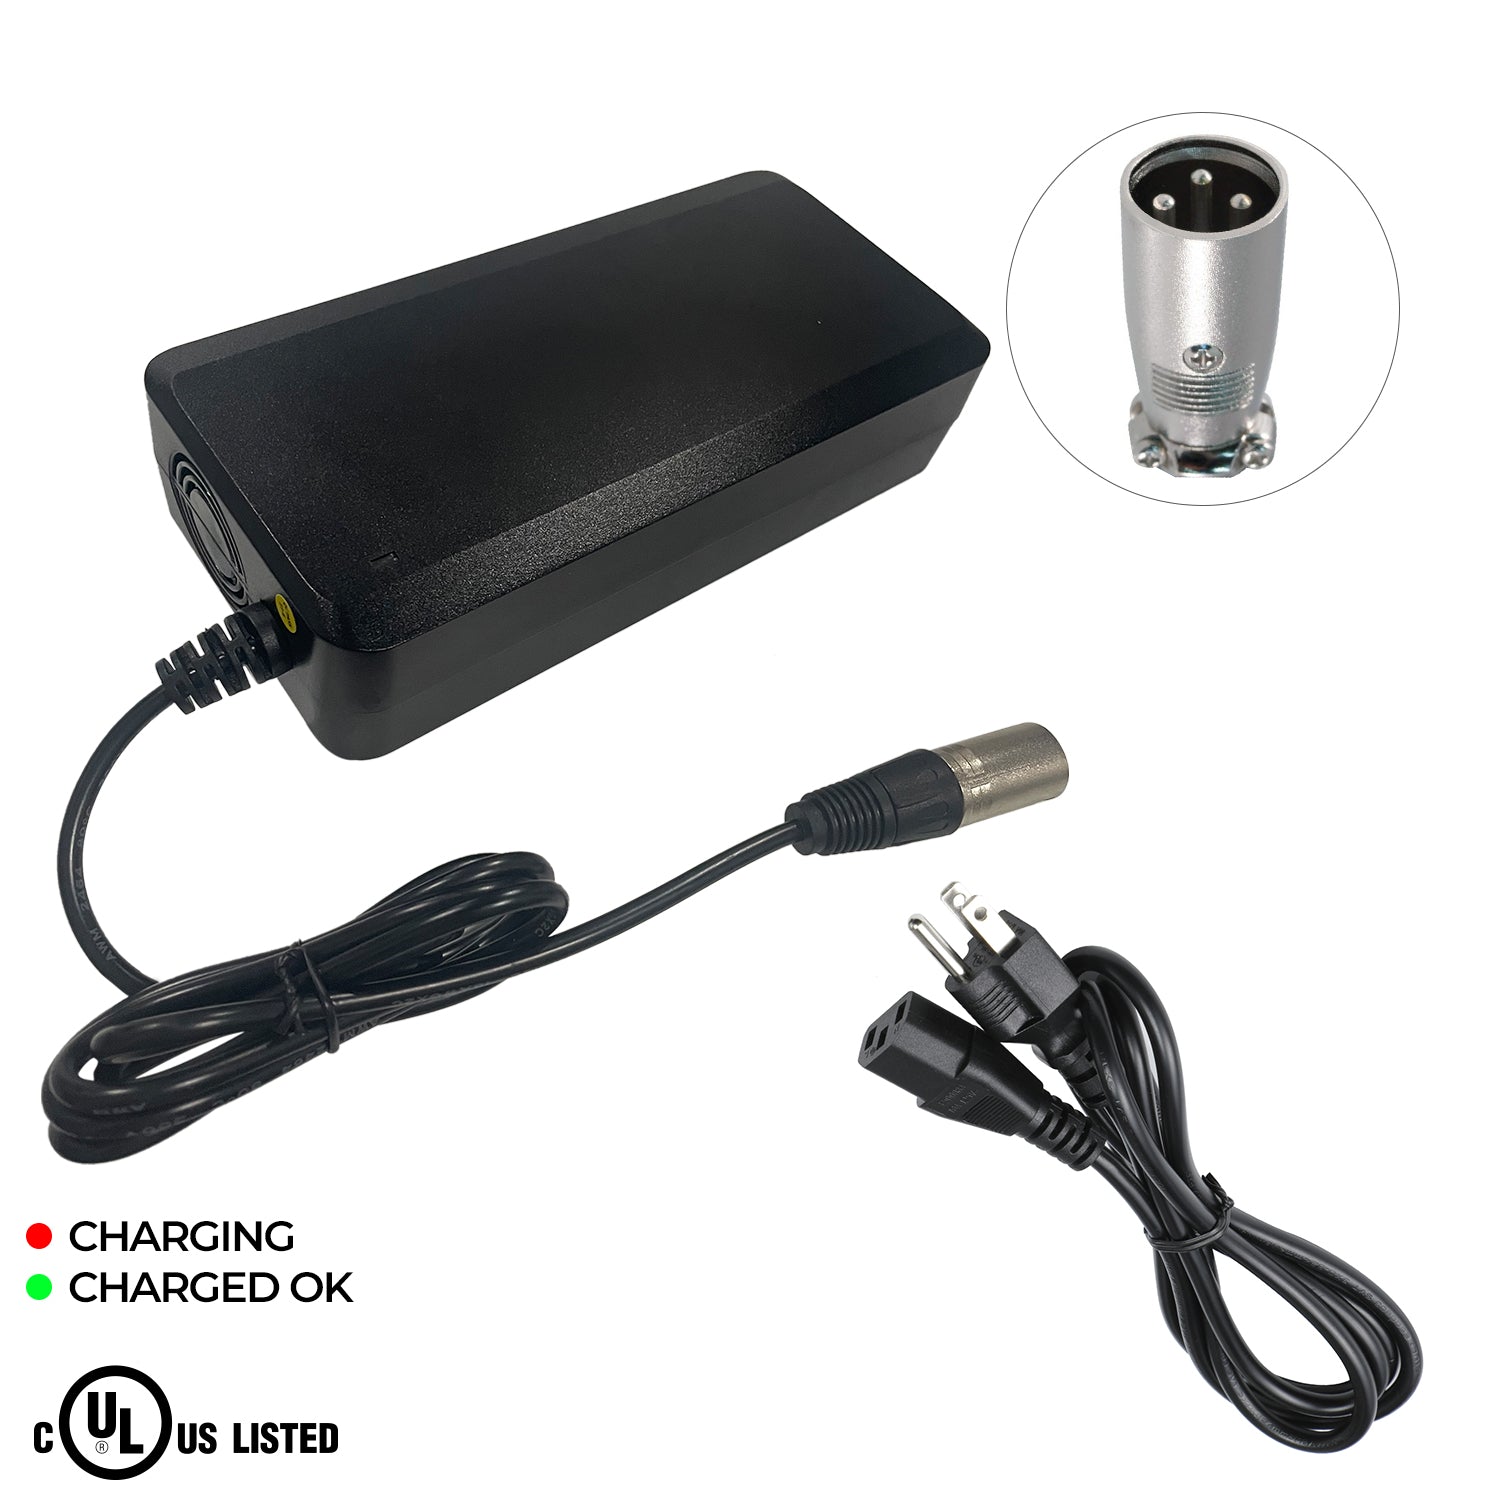 UL Listed 24V 8A Charger for Quantum Series Scooters